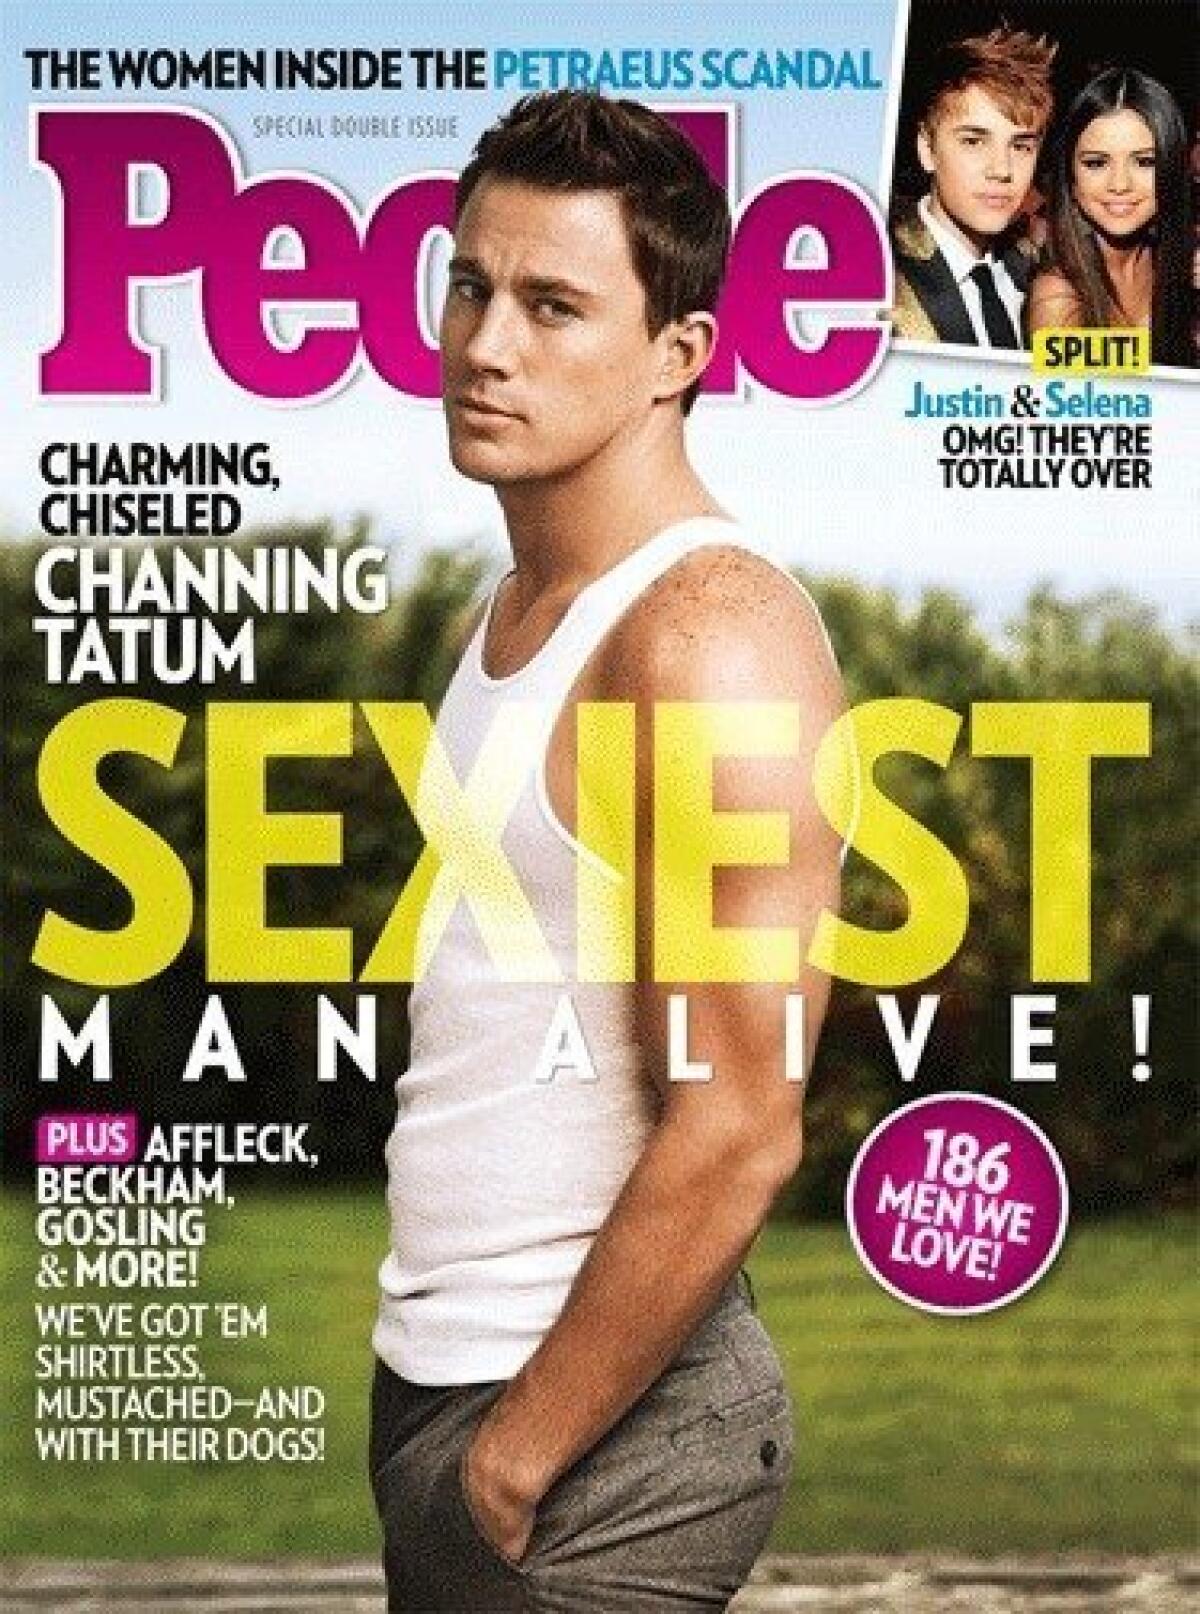 People has chosen Channing Tatum as this year's "Sexiest Man Alive."